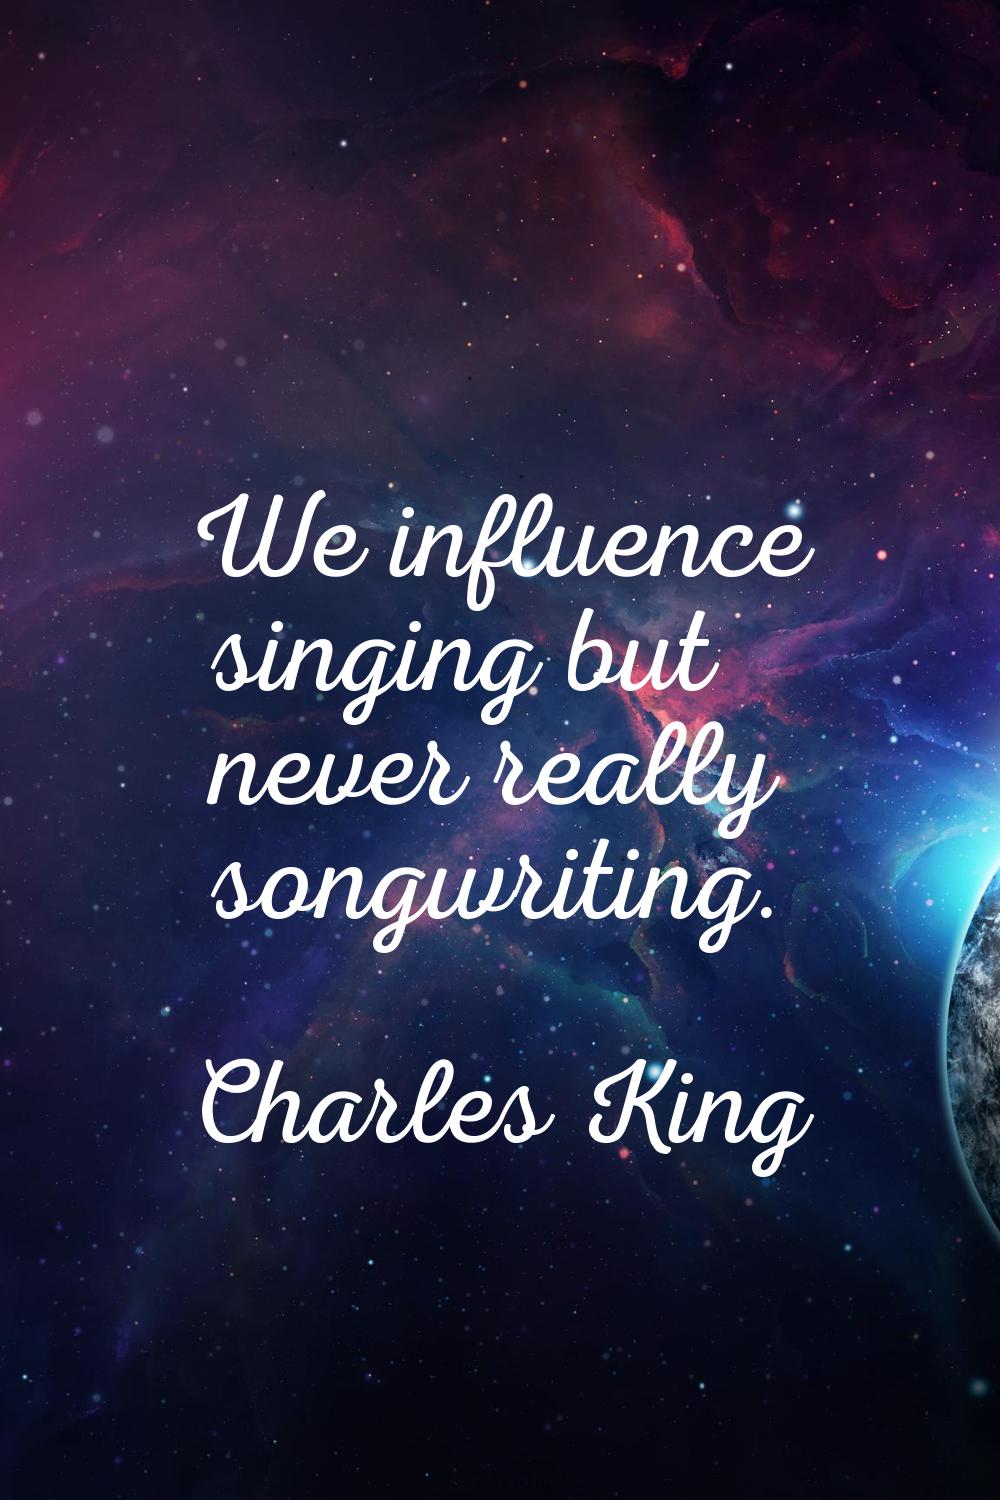 We influence singing but never really songwriting.